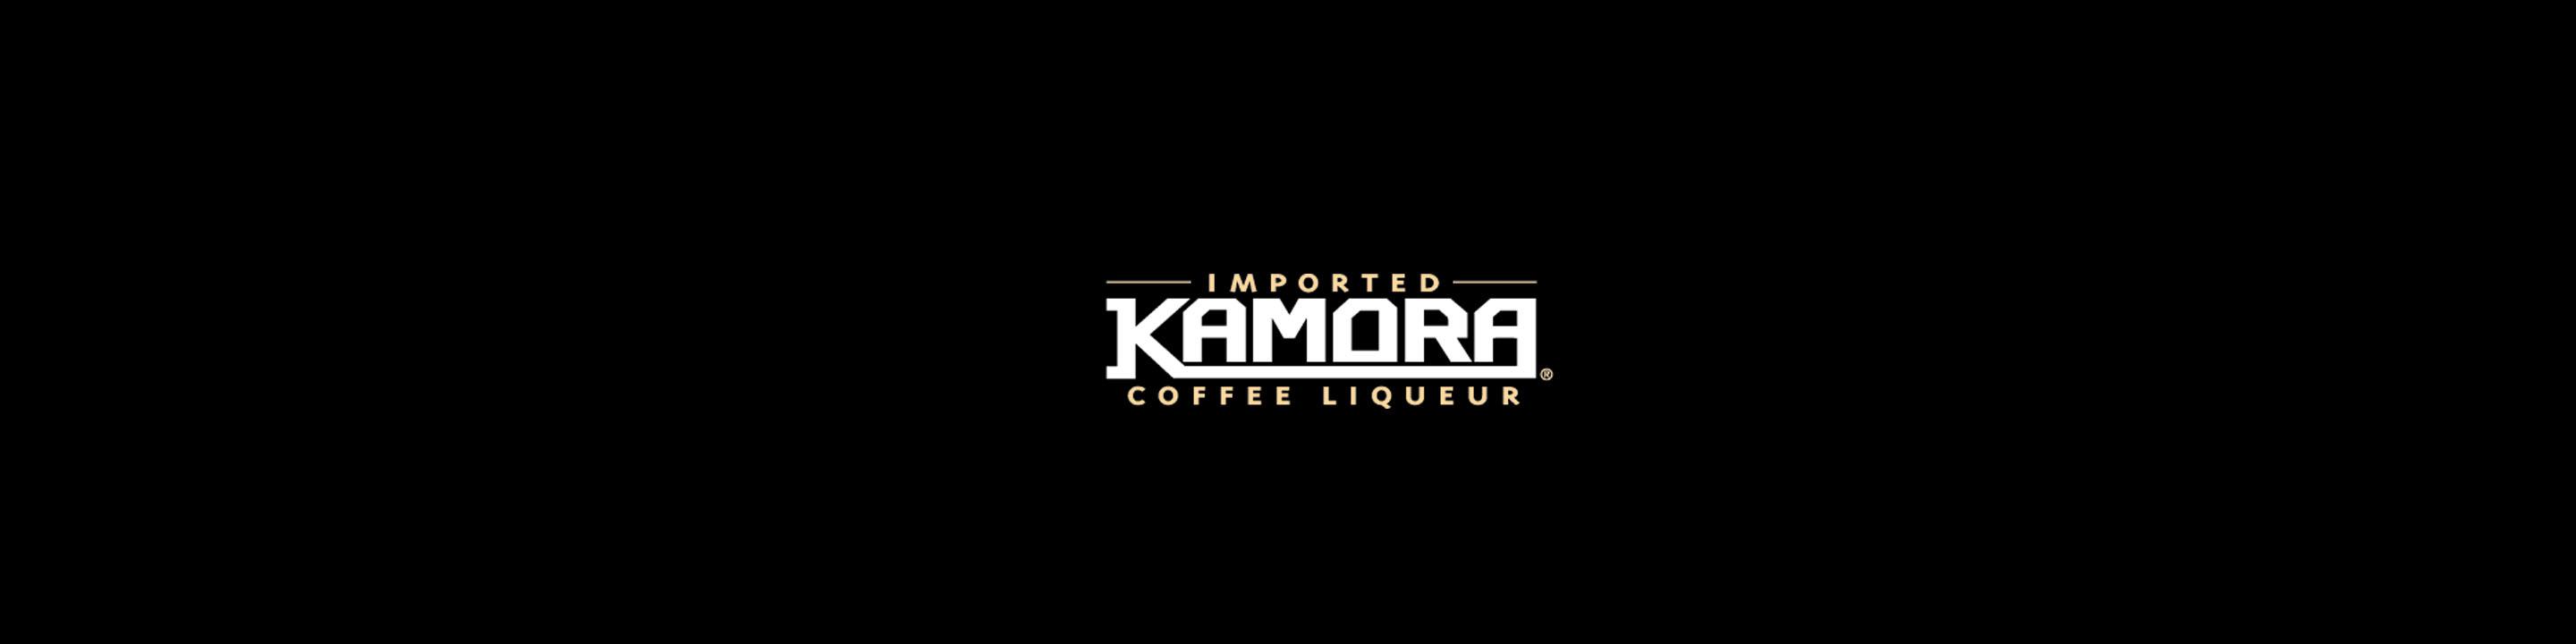 Wind down with true coffee liqueur.  Kamora® brings you the finest beans, roasted to perfection, blended to a satiny smooth decadence with vanilla, chocolate and caramel notes. In a cocktail, in coffee or alone on ice, Kamora® is just right, anytime.

Buy Kamora online now from nearby liquor stores via Minibar Delivery.